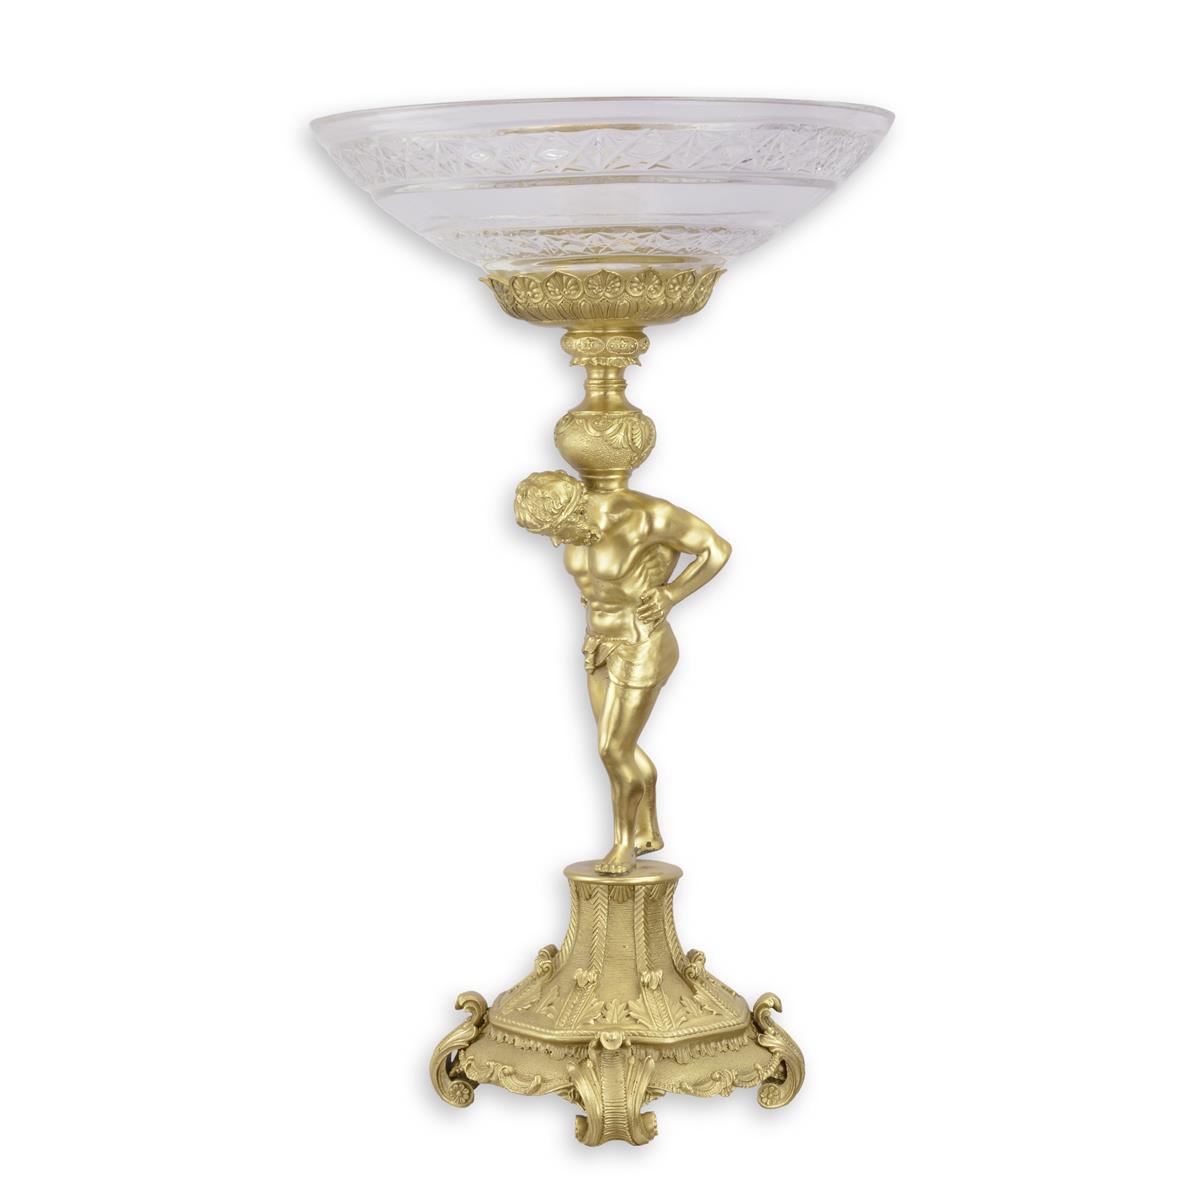 A BRONZE MOUNTED GLASS BOWL ON STAND